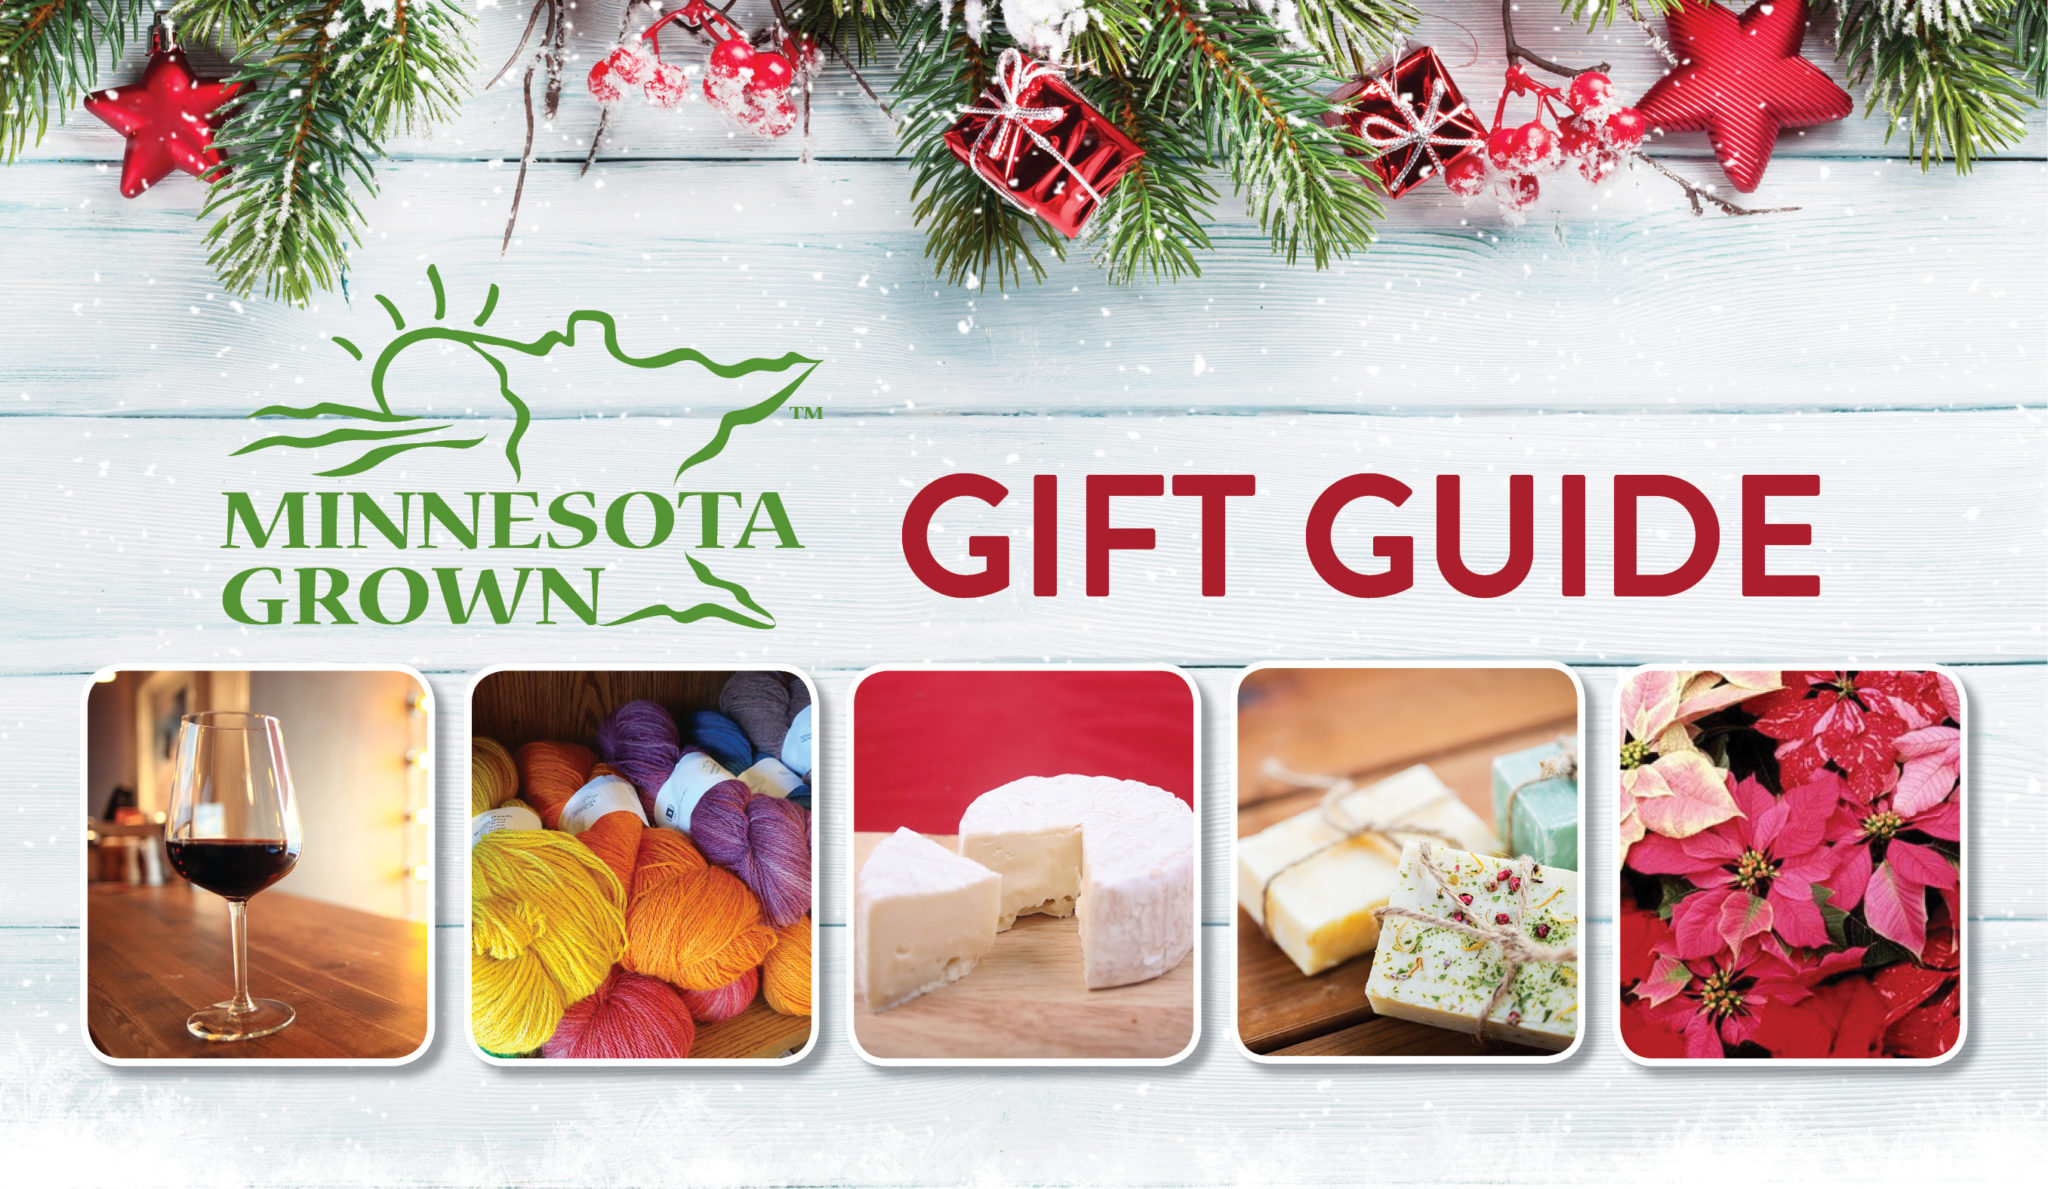 MN Grown Gift Guide 2018 Ad 1302 x 756